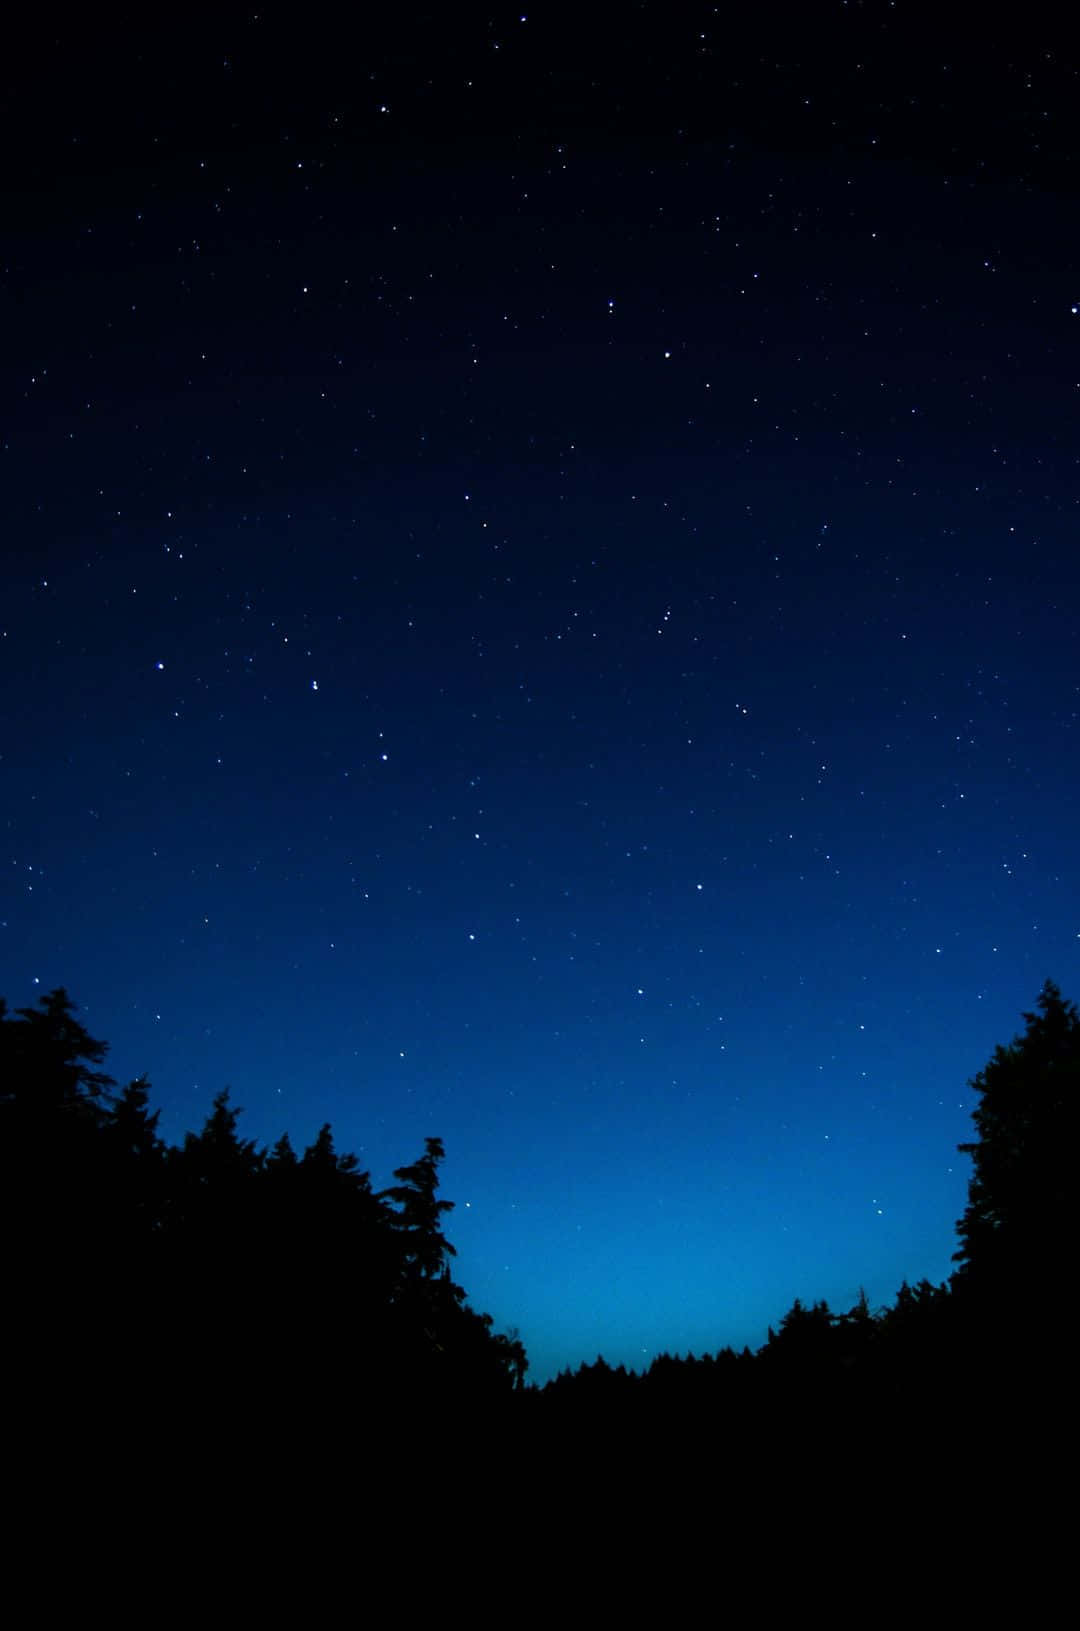 Submerge yourself in the mysterious dark blue of the night sky.